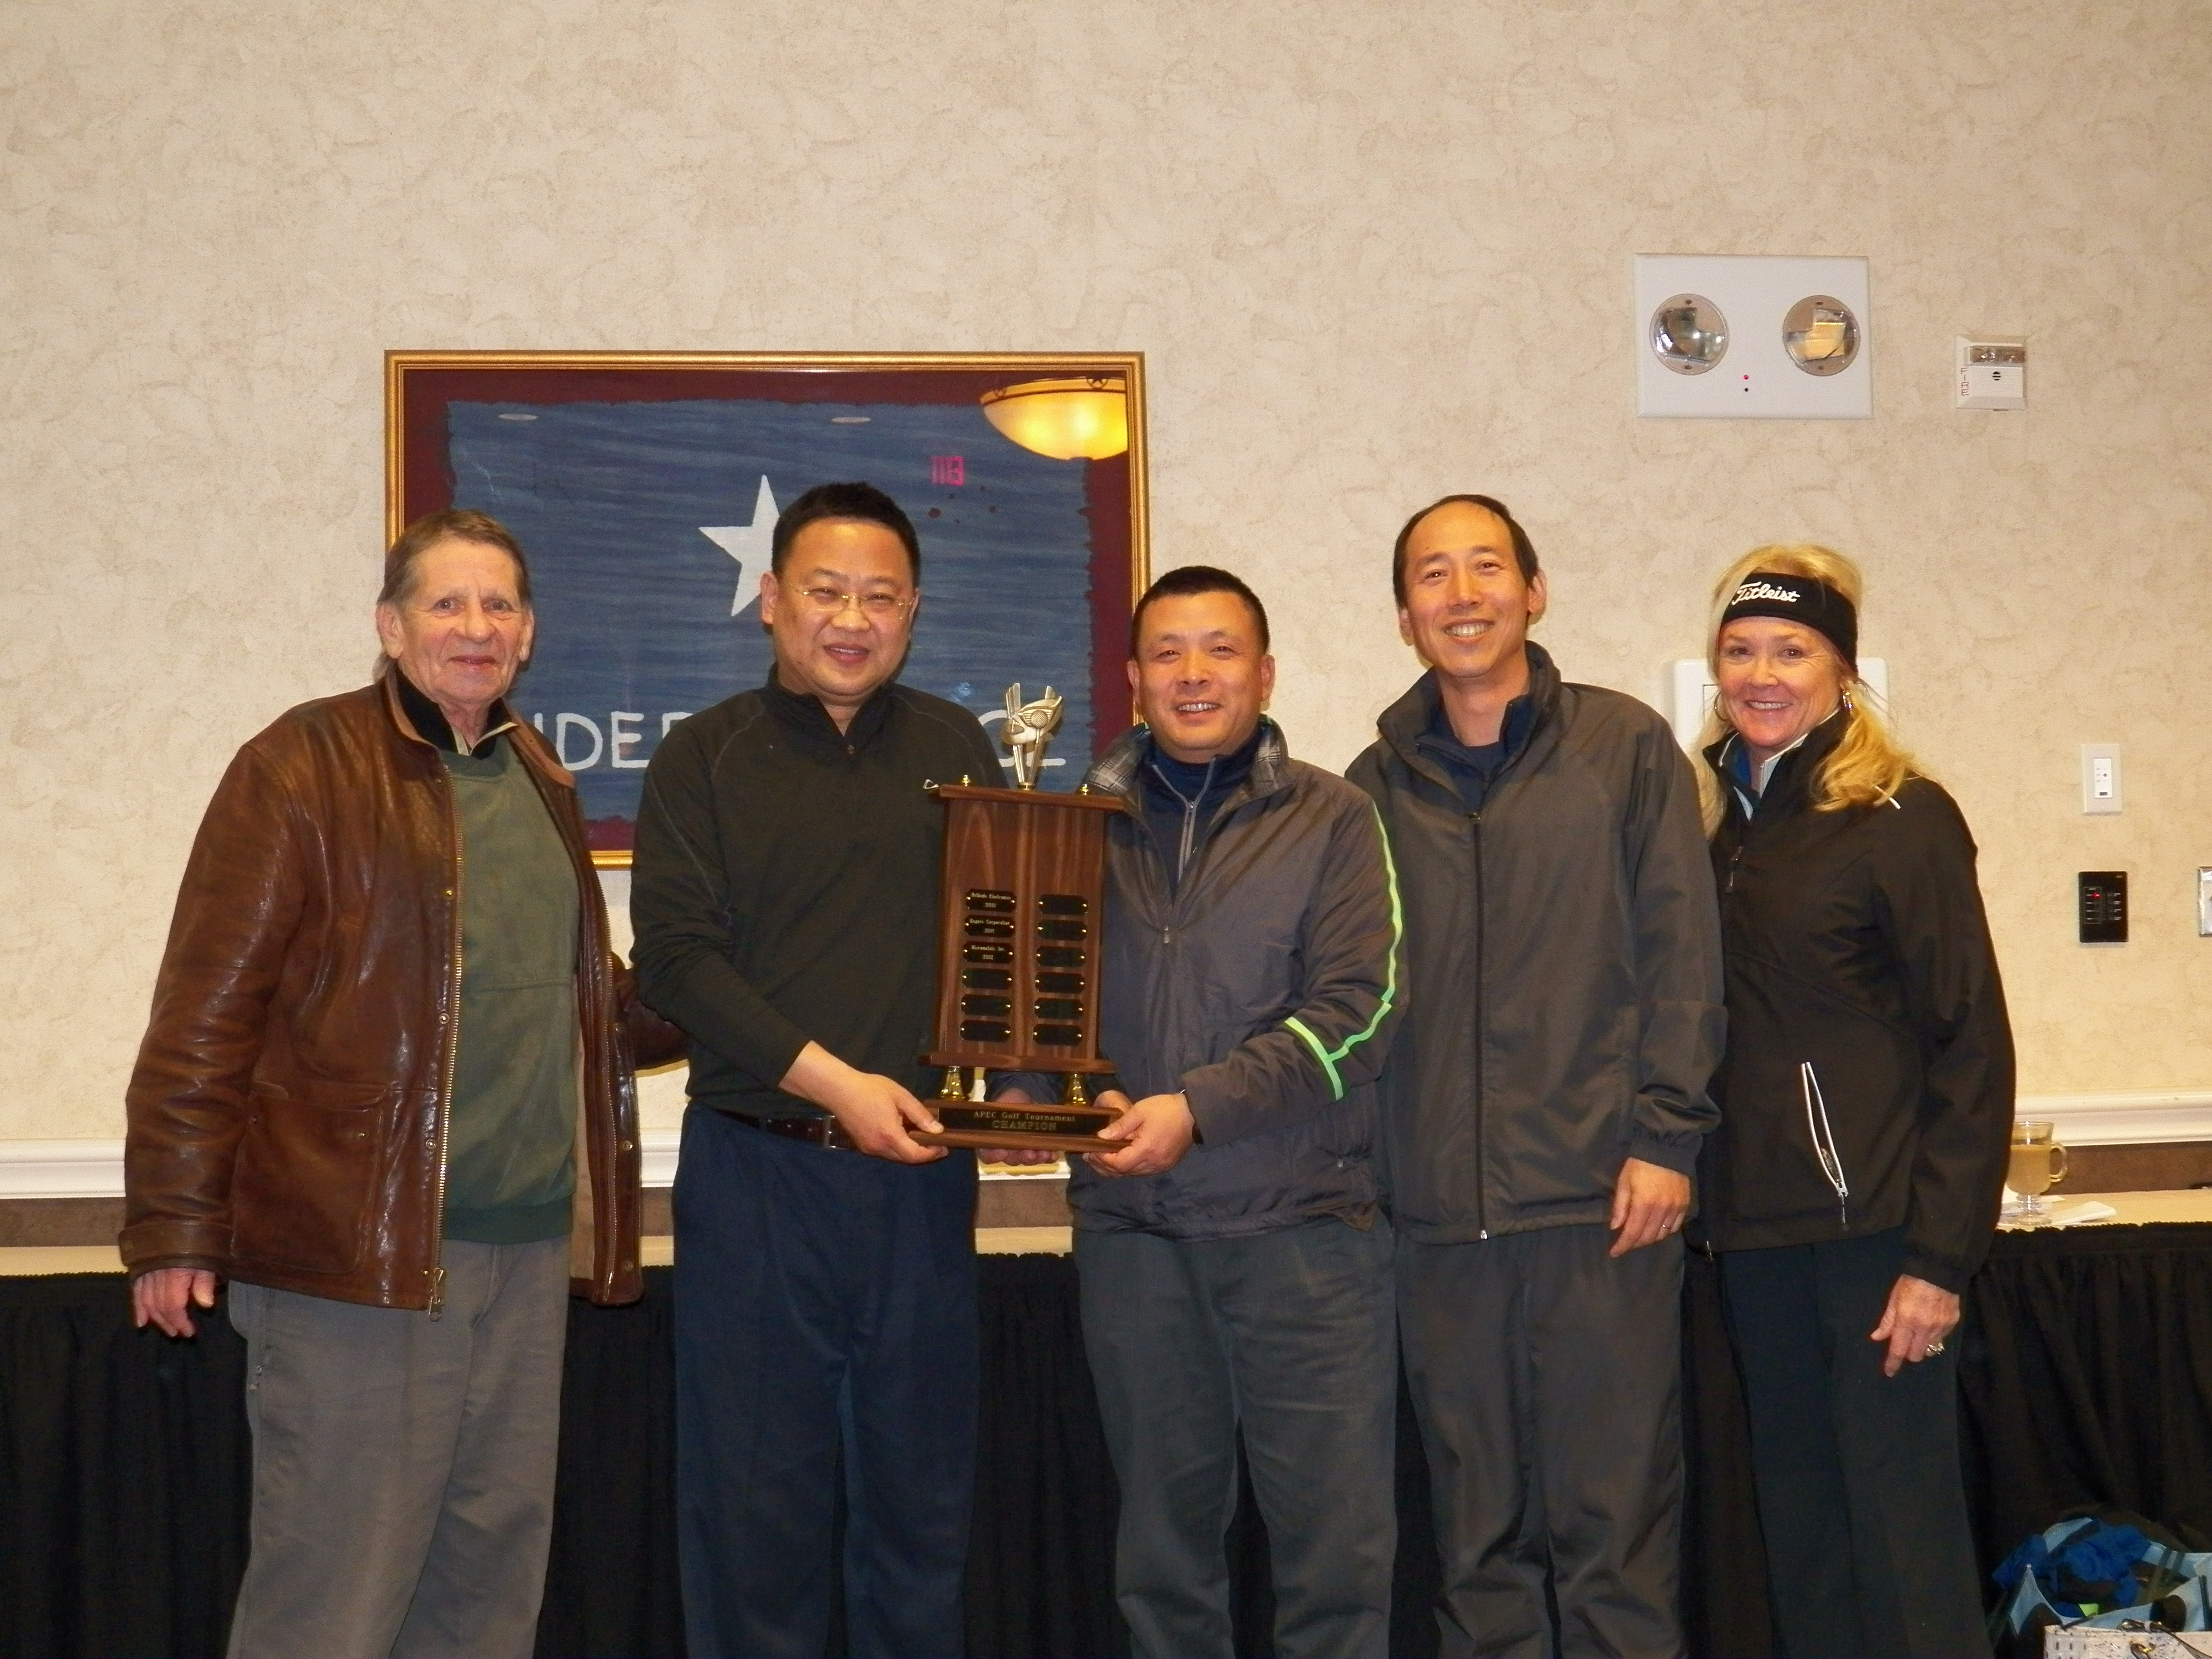 Coilcraft to co-sponsor sixth annual pre-APEC golf tournament on March 15th